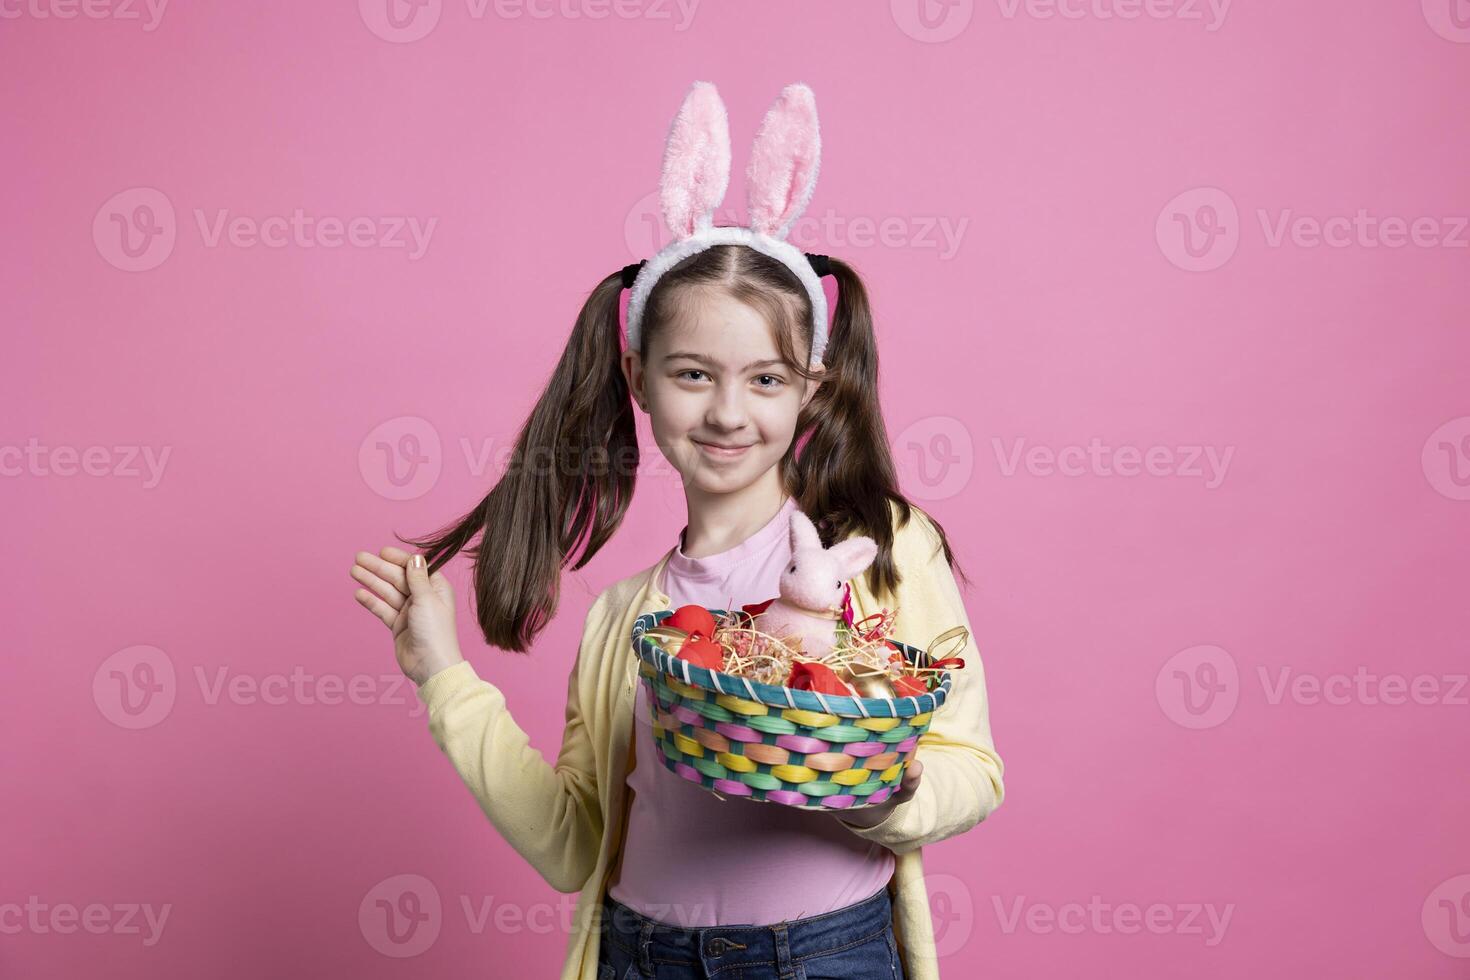 Little child with bunny ears holds Easter toys and decorations, evoking the enchantment of the season. Cute girl with adorable smile showing a rabbit and eggs in a basket on camera. photo